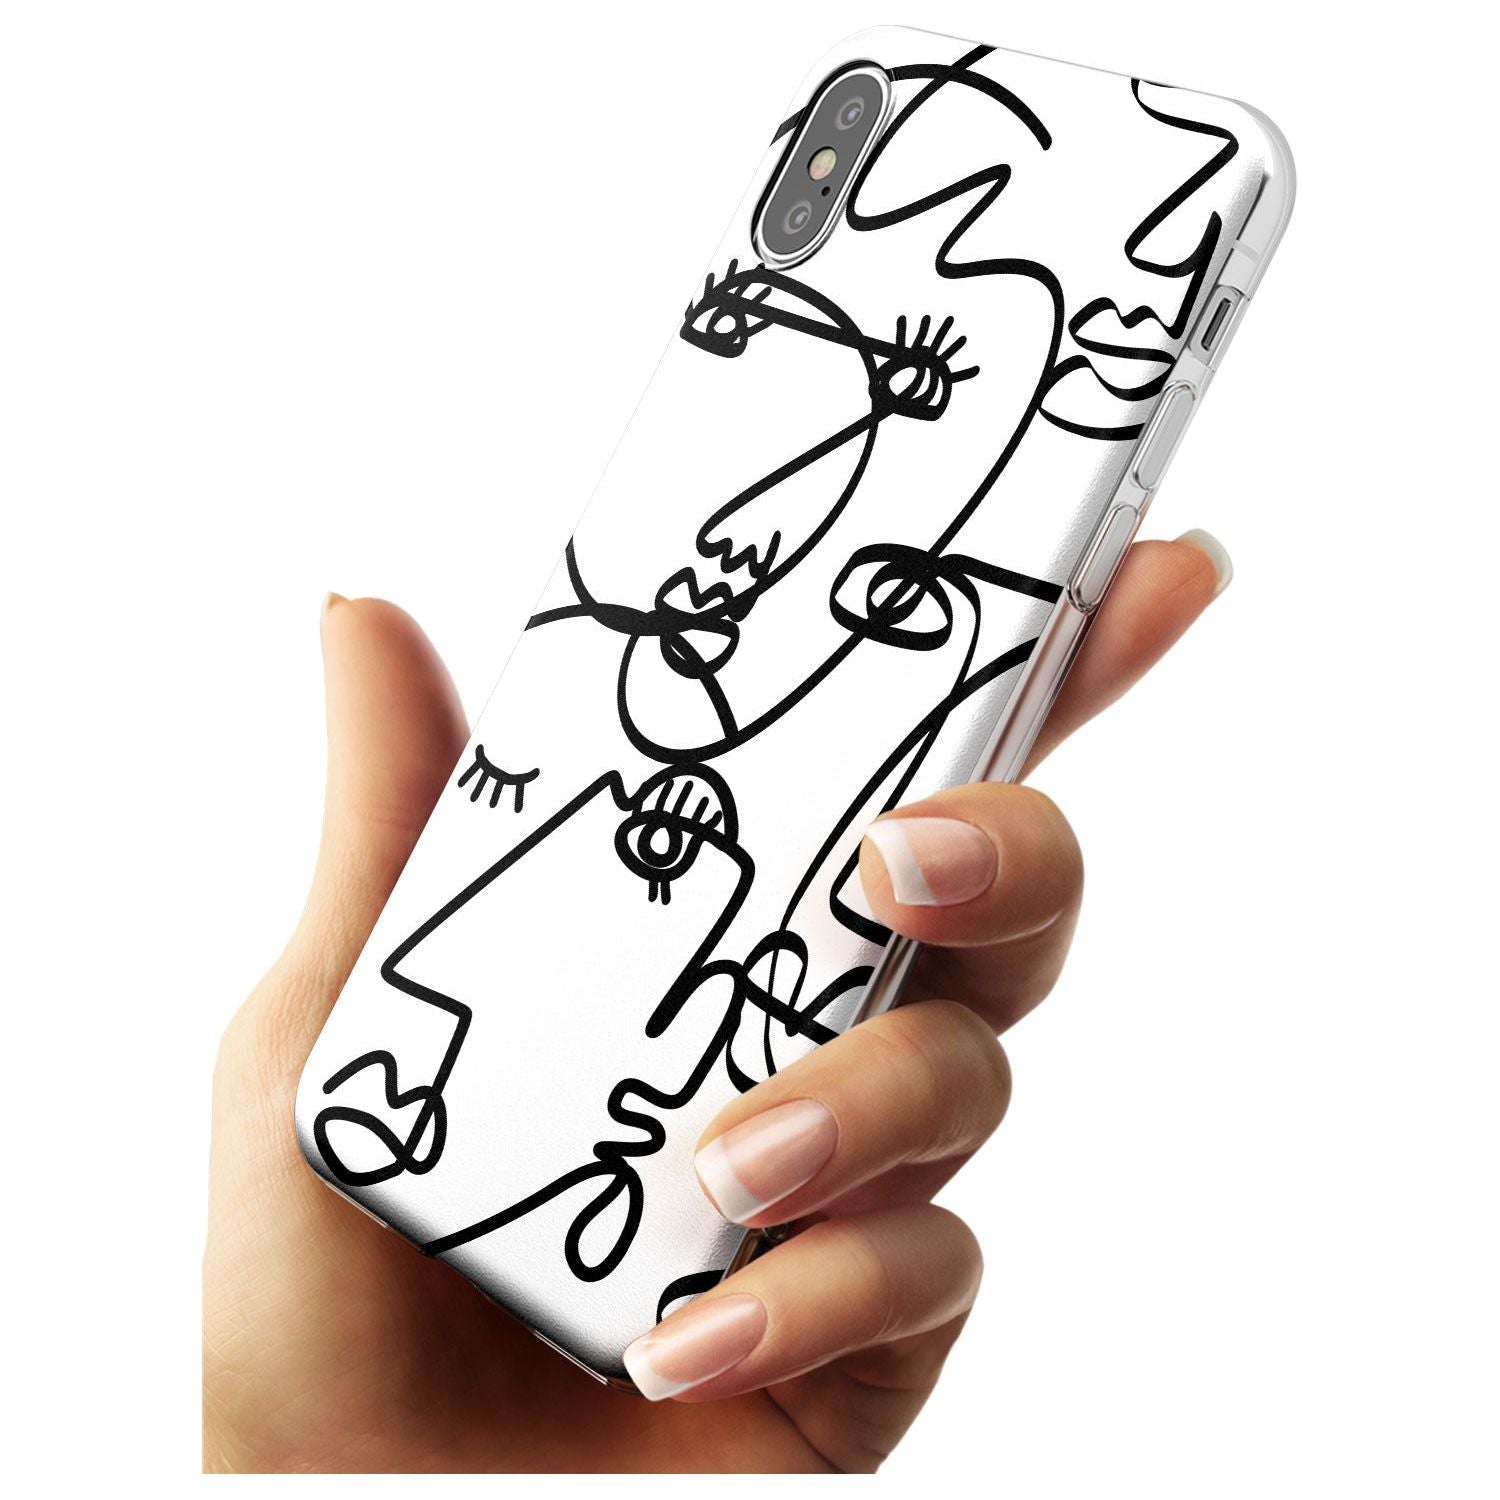 Continuous Line Faces: Black on White Black Impact Phone Case for iPhone X XS Max XR